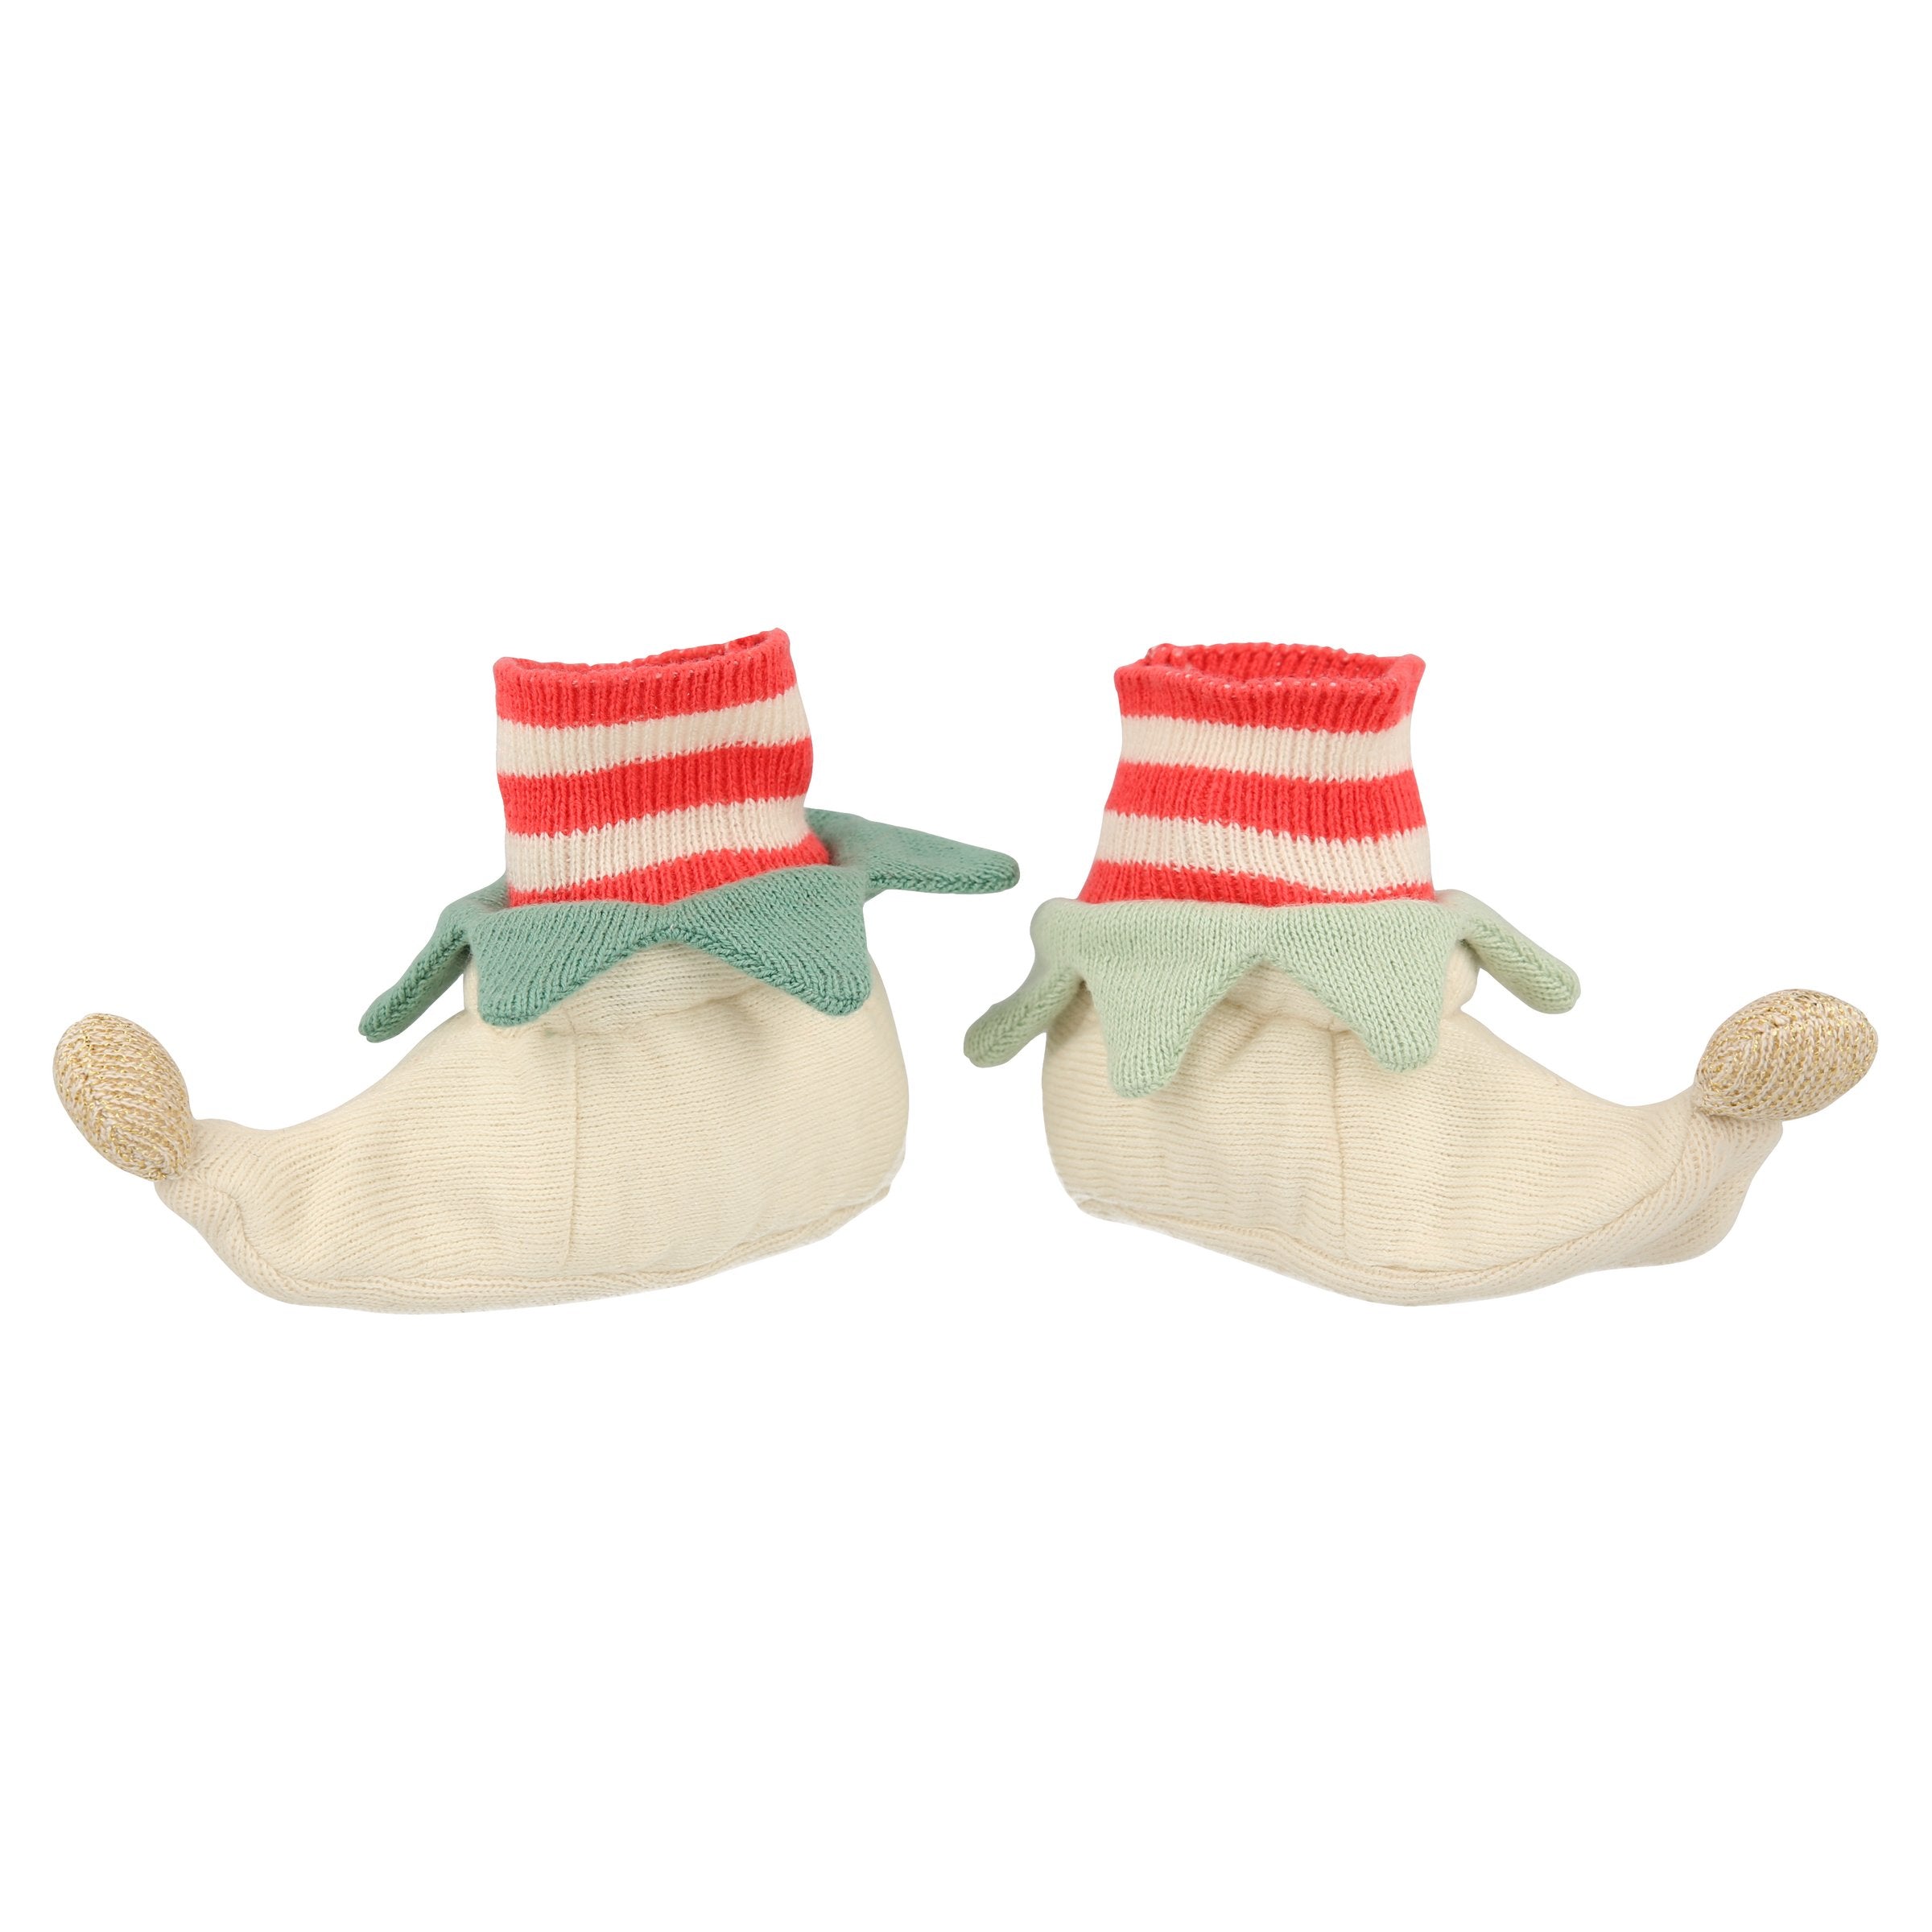 These elf baby booties make a gorgeous baby Xmas outfit.